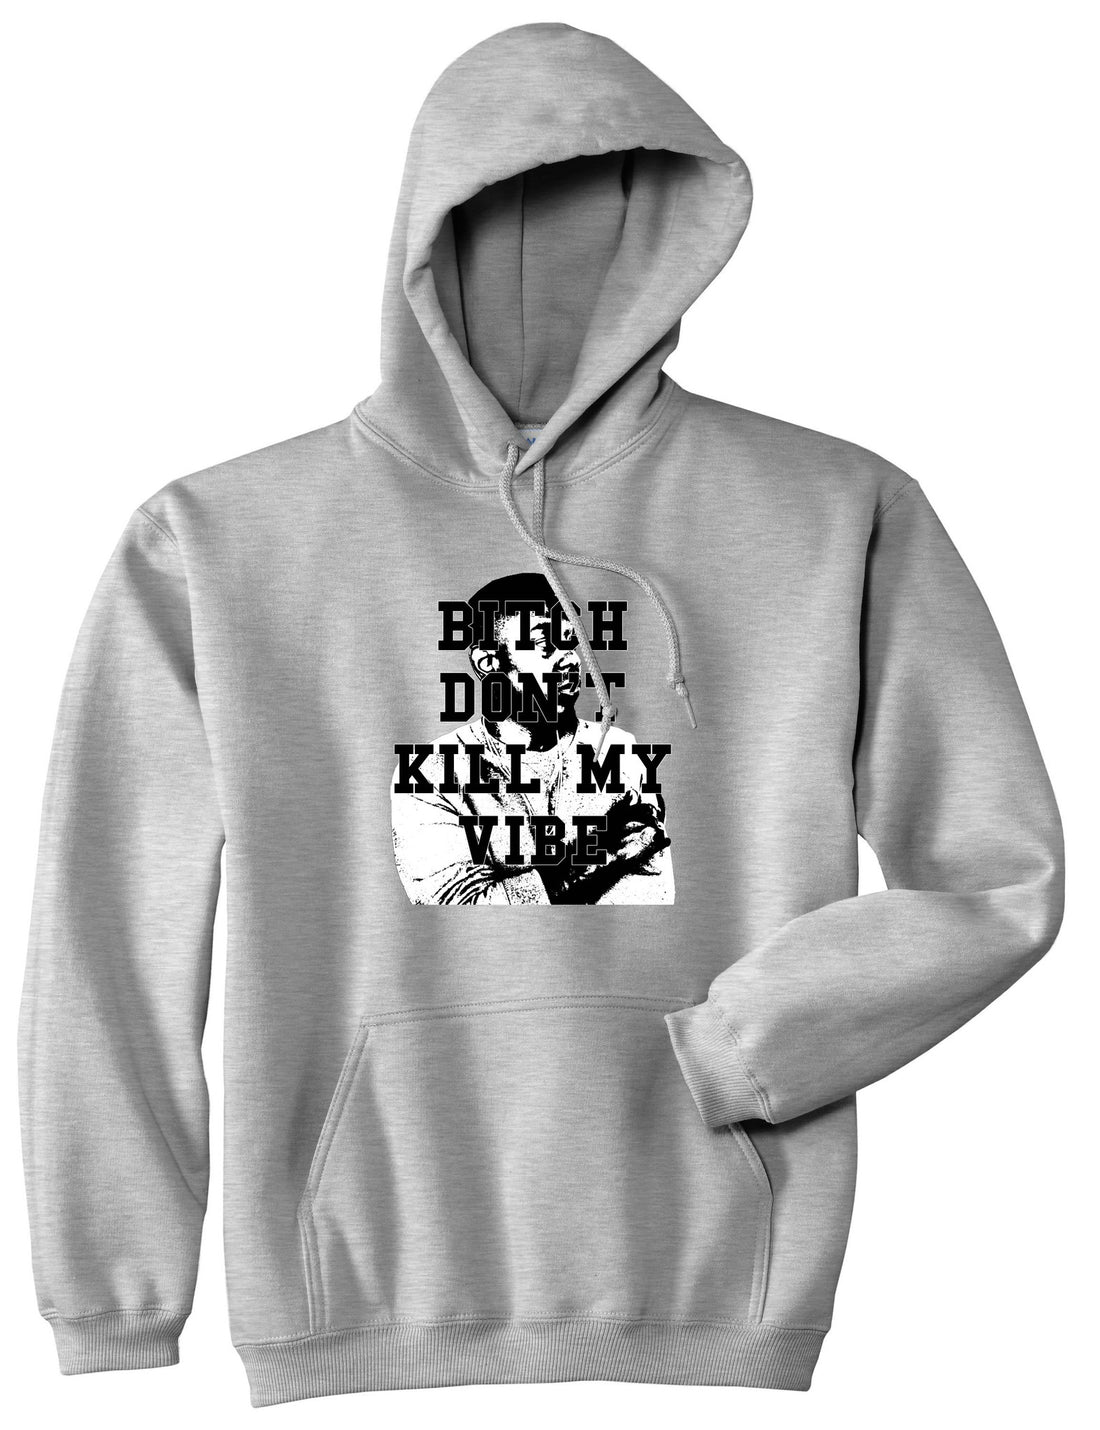 Bitch Dont Kill My Vibe Kendrick Boys Kids Pullover Hoodie Hoody In Grey by Kings Of NY